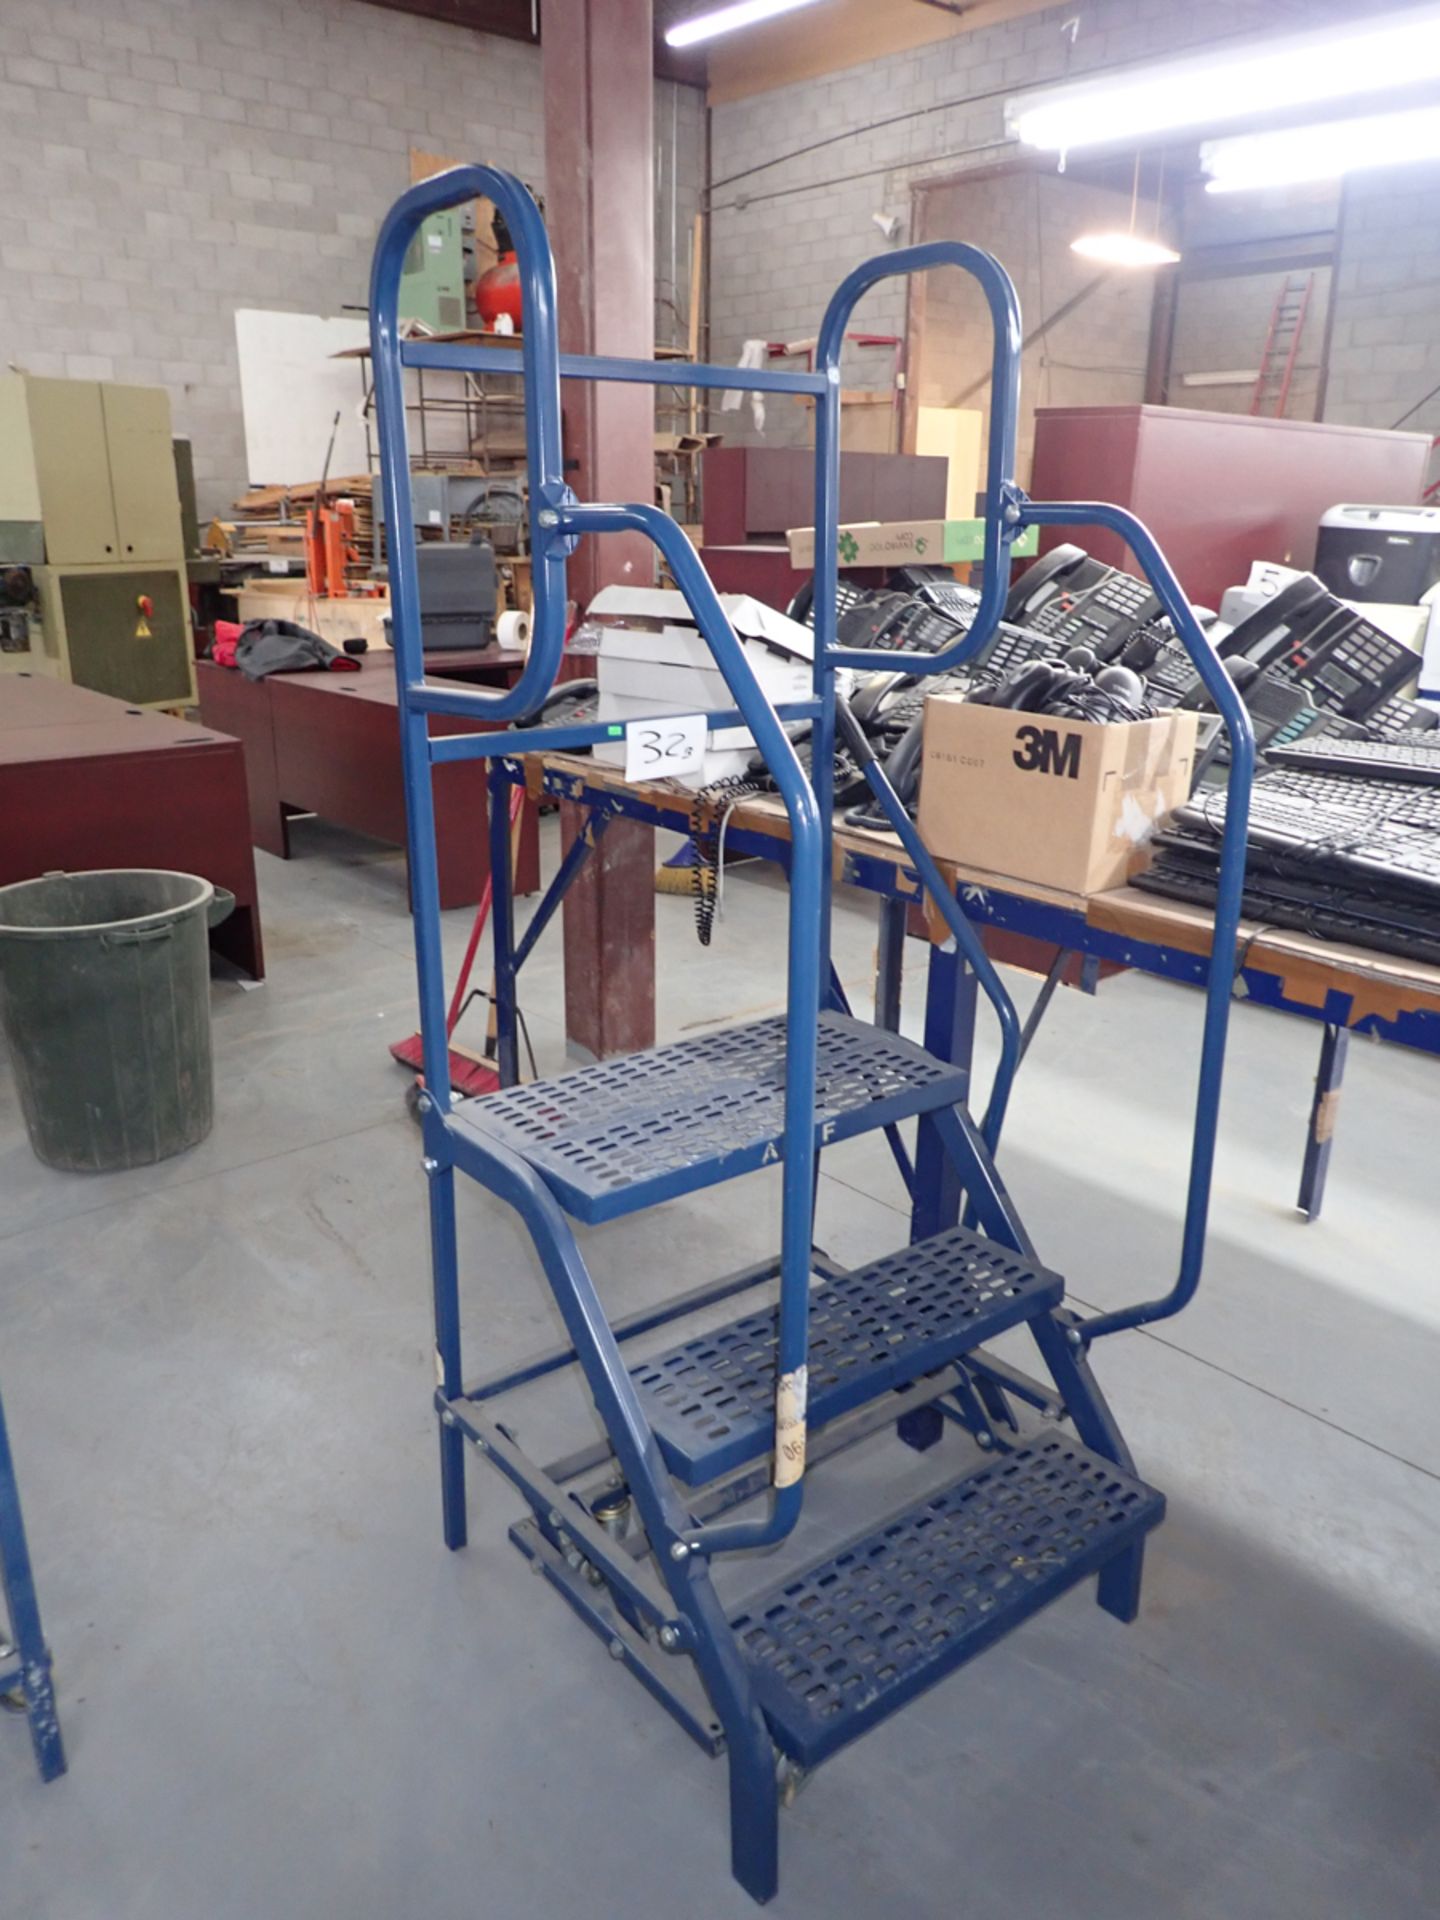 3 STEP MOBILE LADDER / ESCALIER MOBILE 3 MARCHES